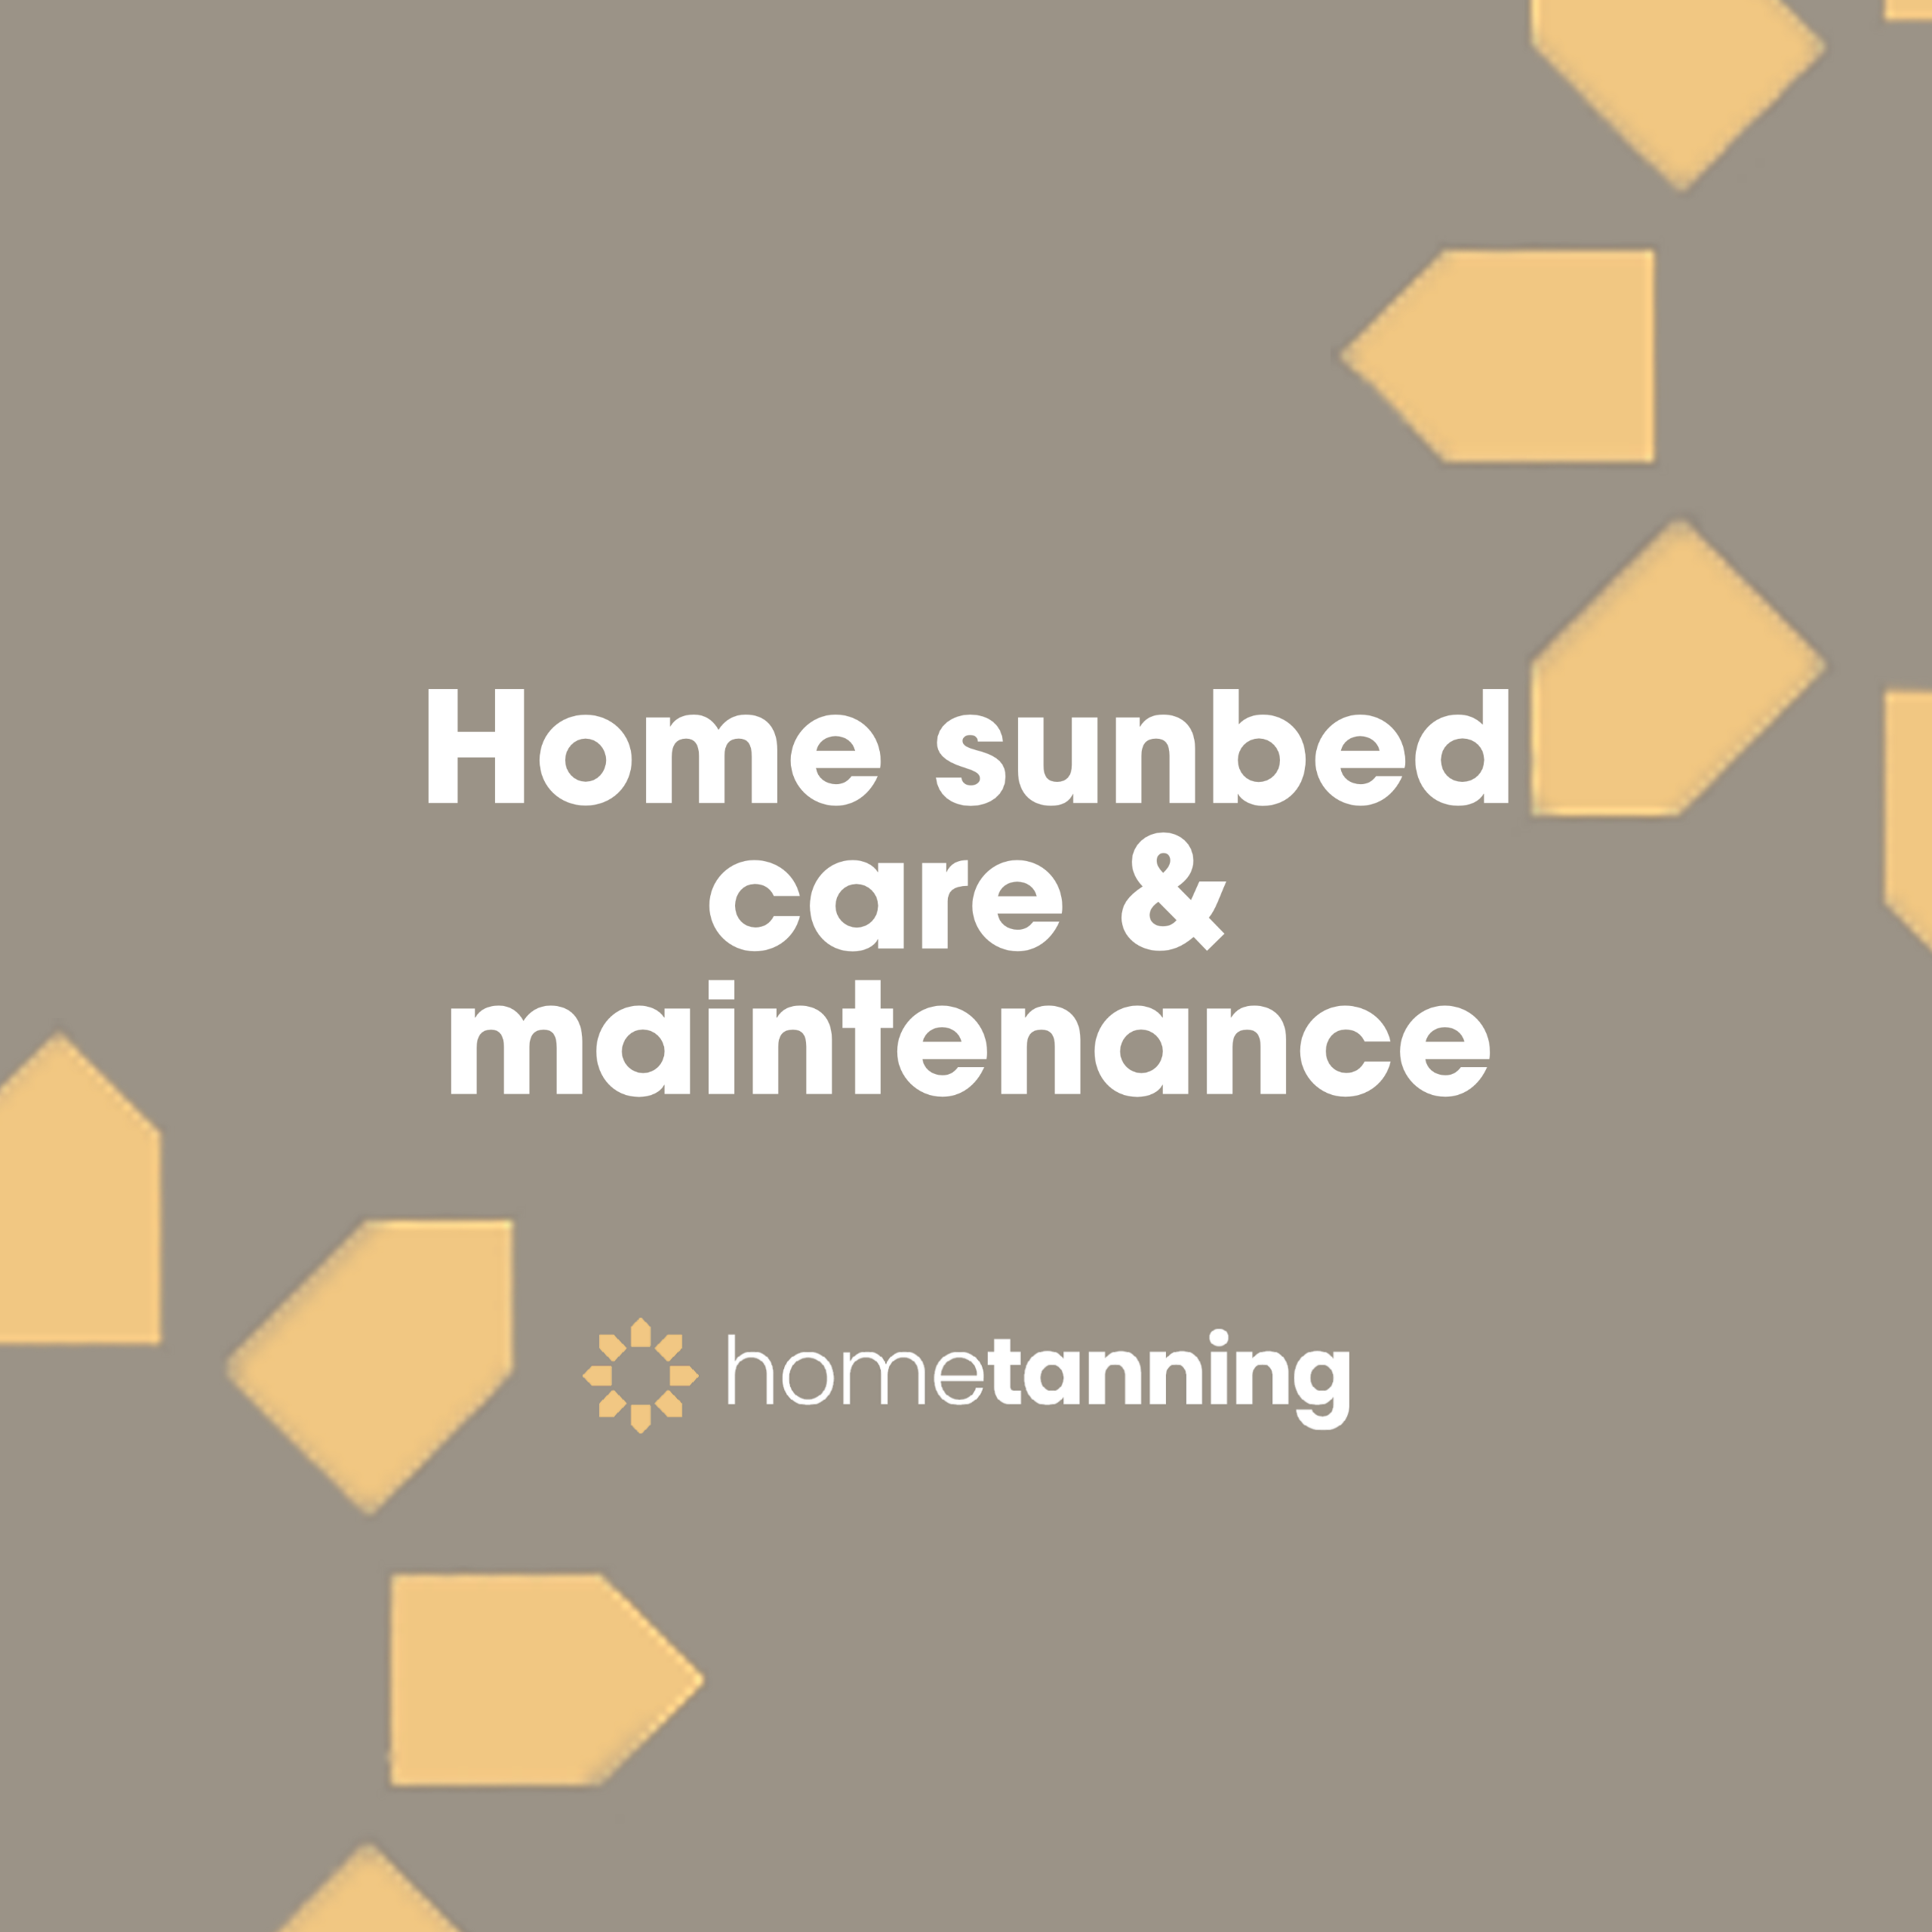 maintenance and care for home sunbed home tanning